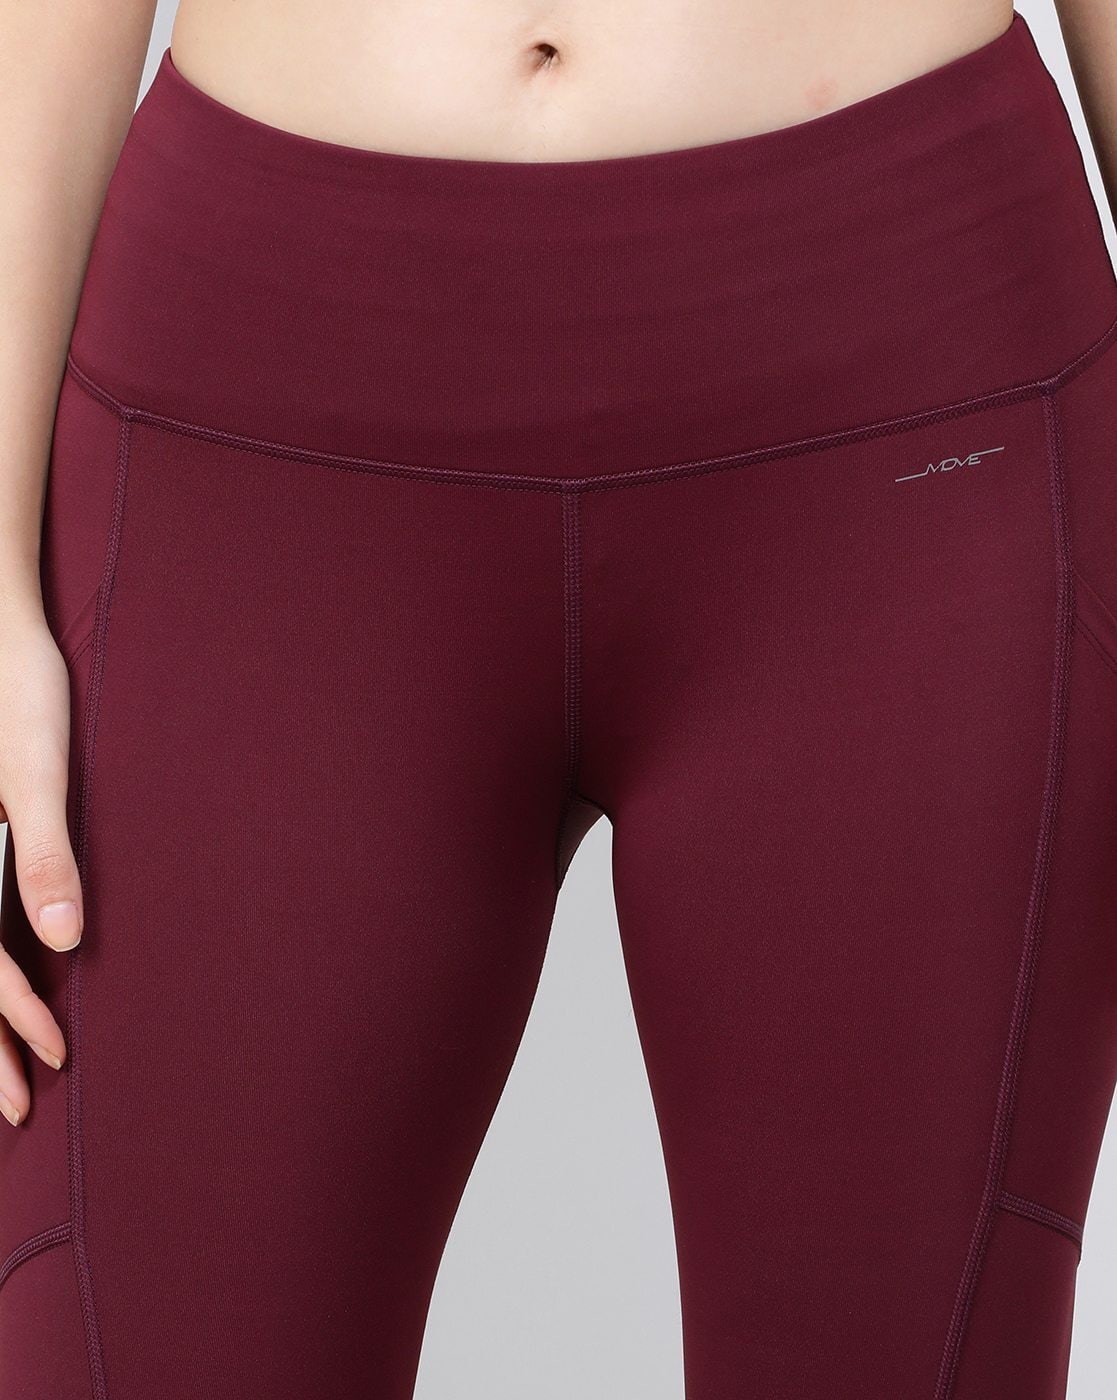 High Waist Jockey Women Polyester Grapewine Legging, Casual Wear, Skin Fit  at Rs 879.66 in Ahmedabad